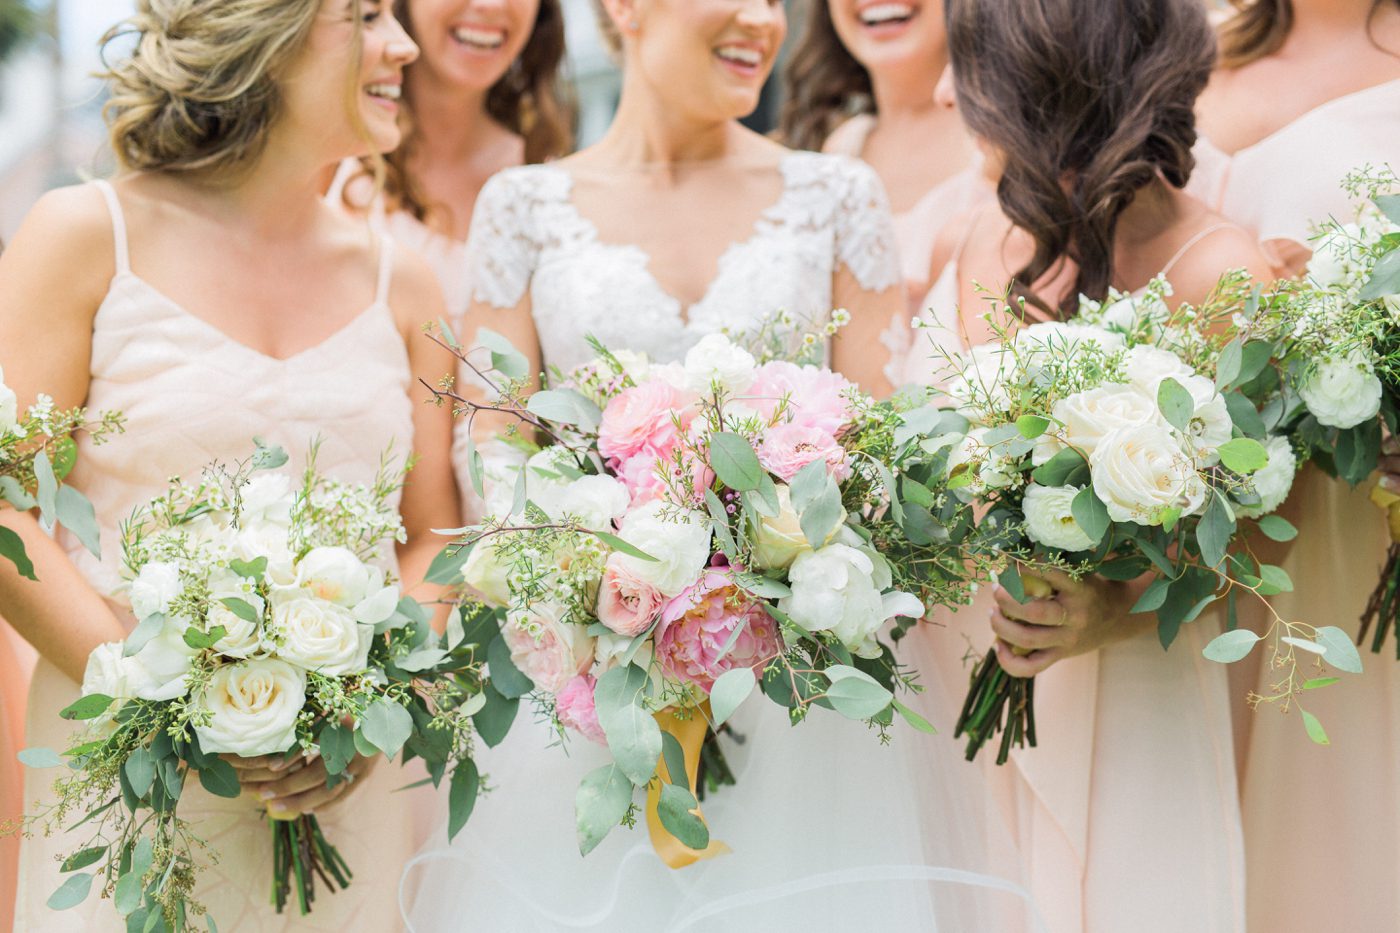 Gorgeous lush bridal bouquets for a southern wedding. Photo by Catherine Ann Photography